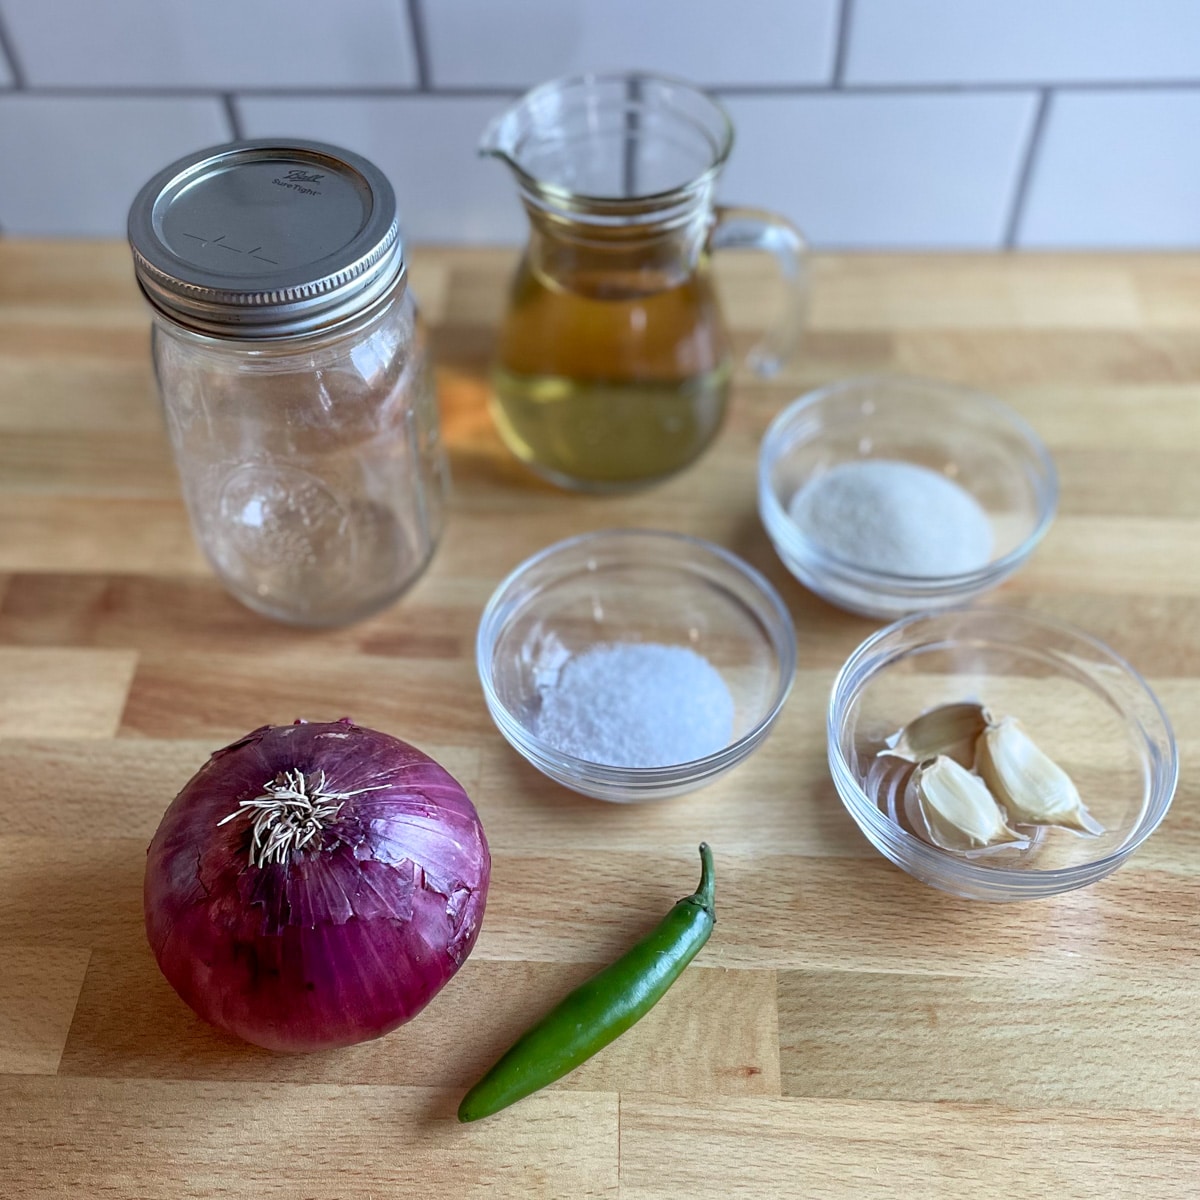 Red onion, serrano peppers, small Mason jar, small clear pitcher of rice vinegar, and three clear pinch bowls of salt, sugar, and garlic cloves sit on a wooden cutting board.